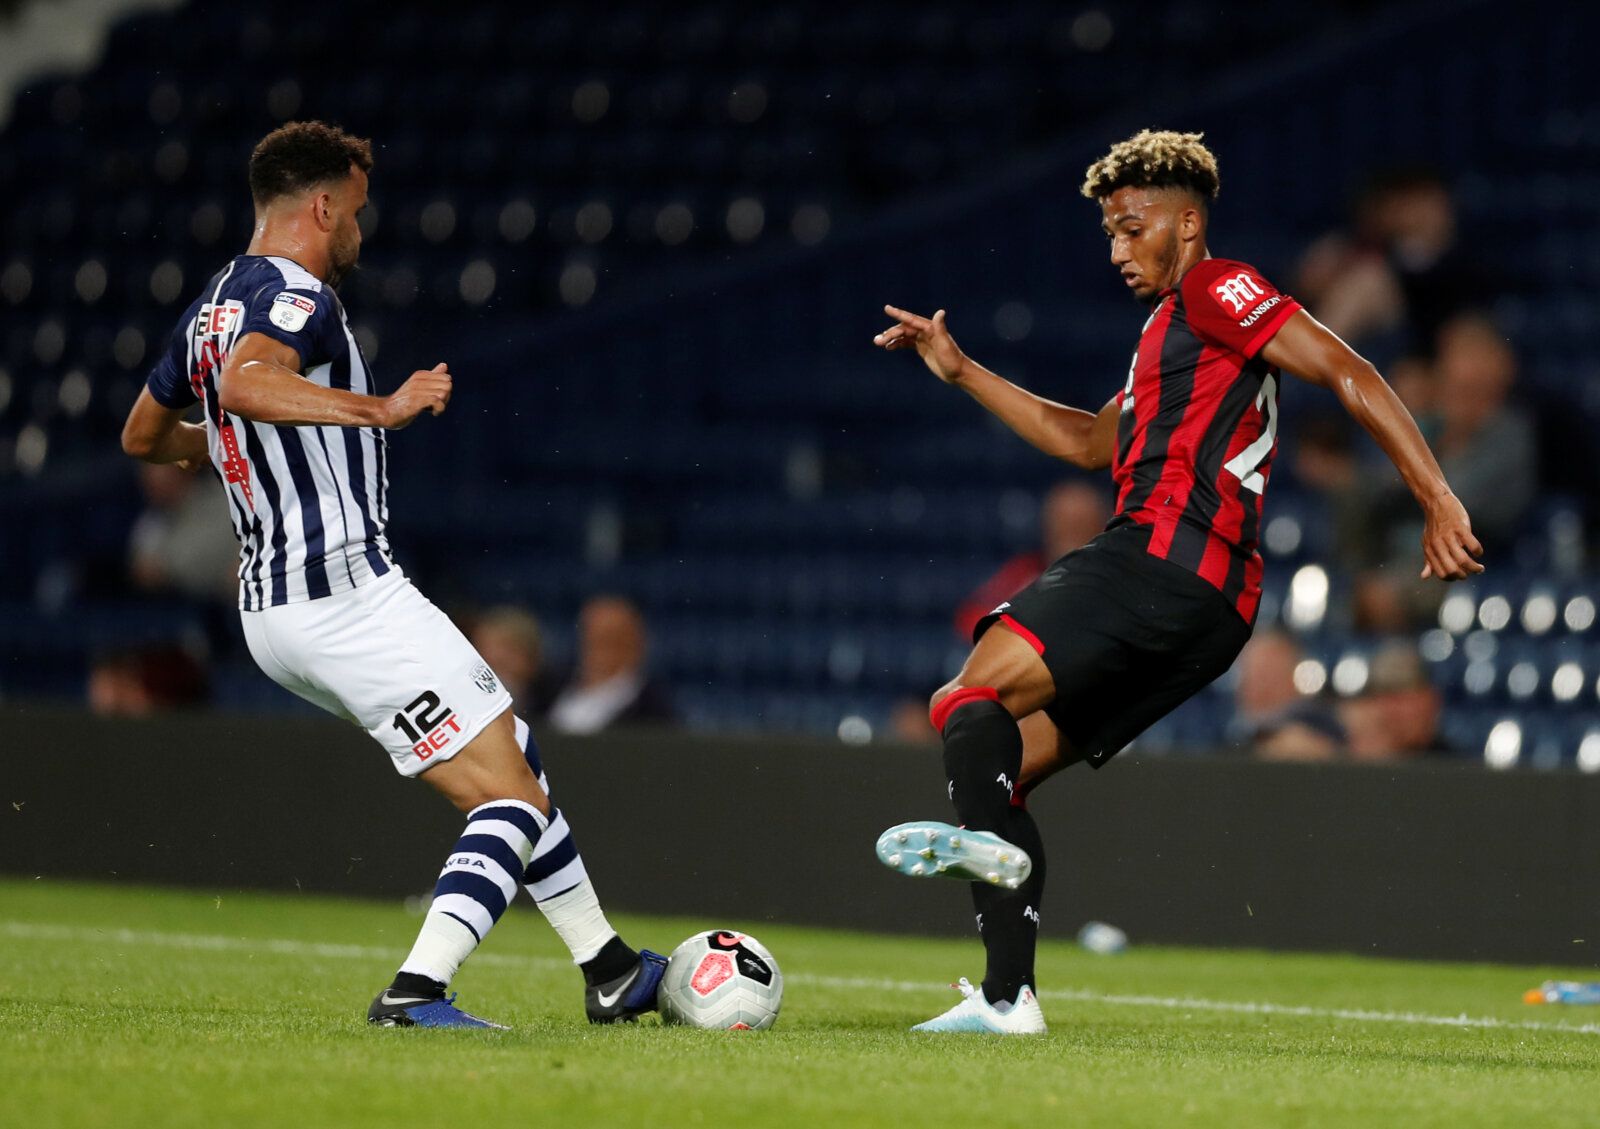 Soccer Football - Pre Season Friendly - West Bromwich Albion v AFC Bournemouth - The Hawthorns, West Bromwich, Britain - July 26, 2019   Bournemouth's Lloyd Kelly in action with West Brom's Hal Robson-Kanu   Action Images via Reuters/Matthew Childs